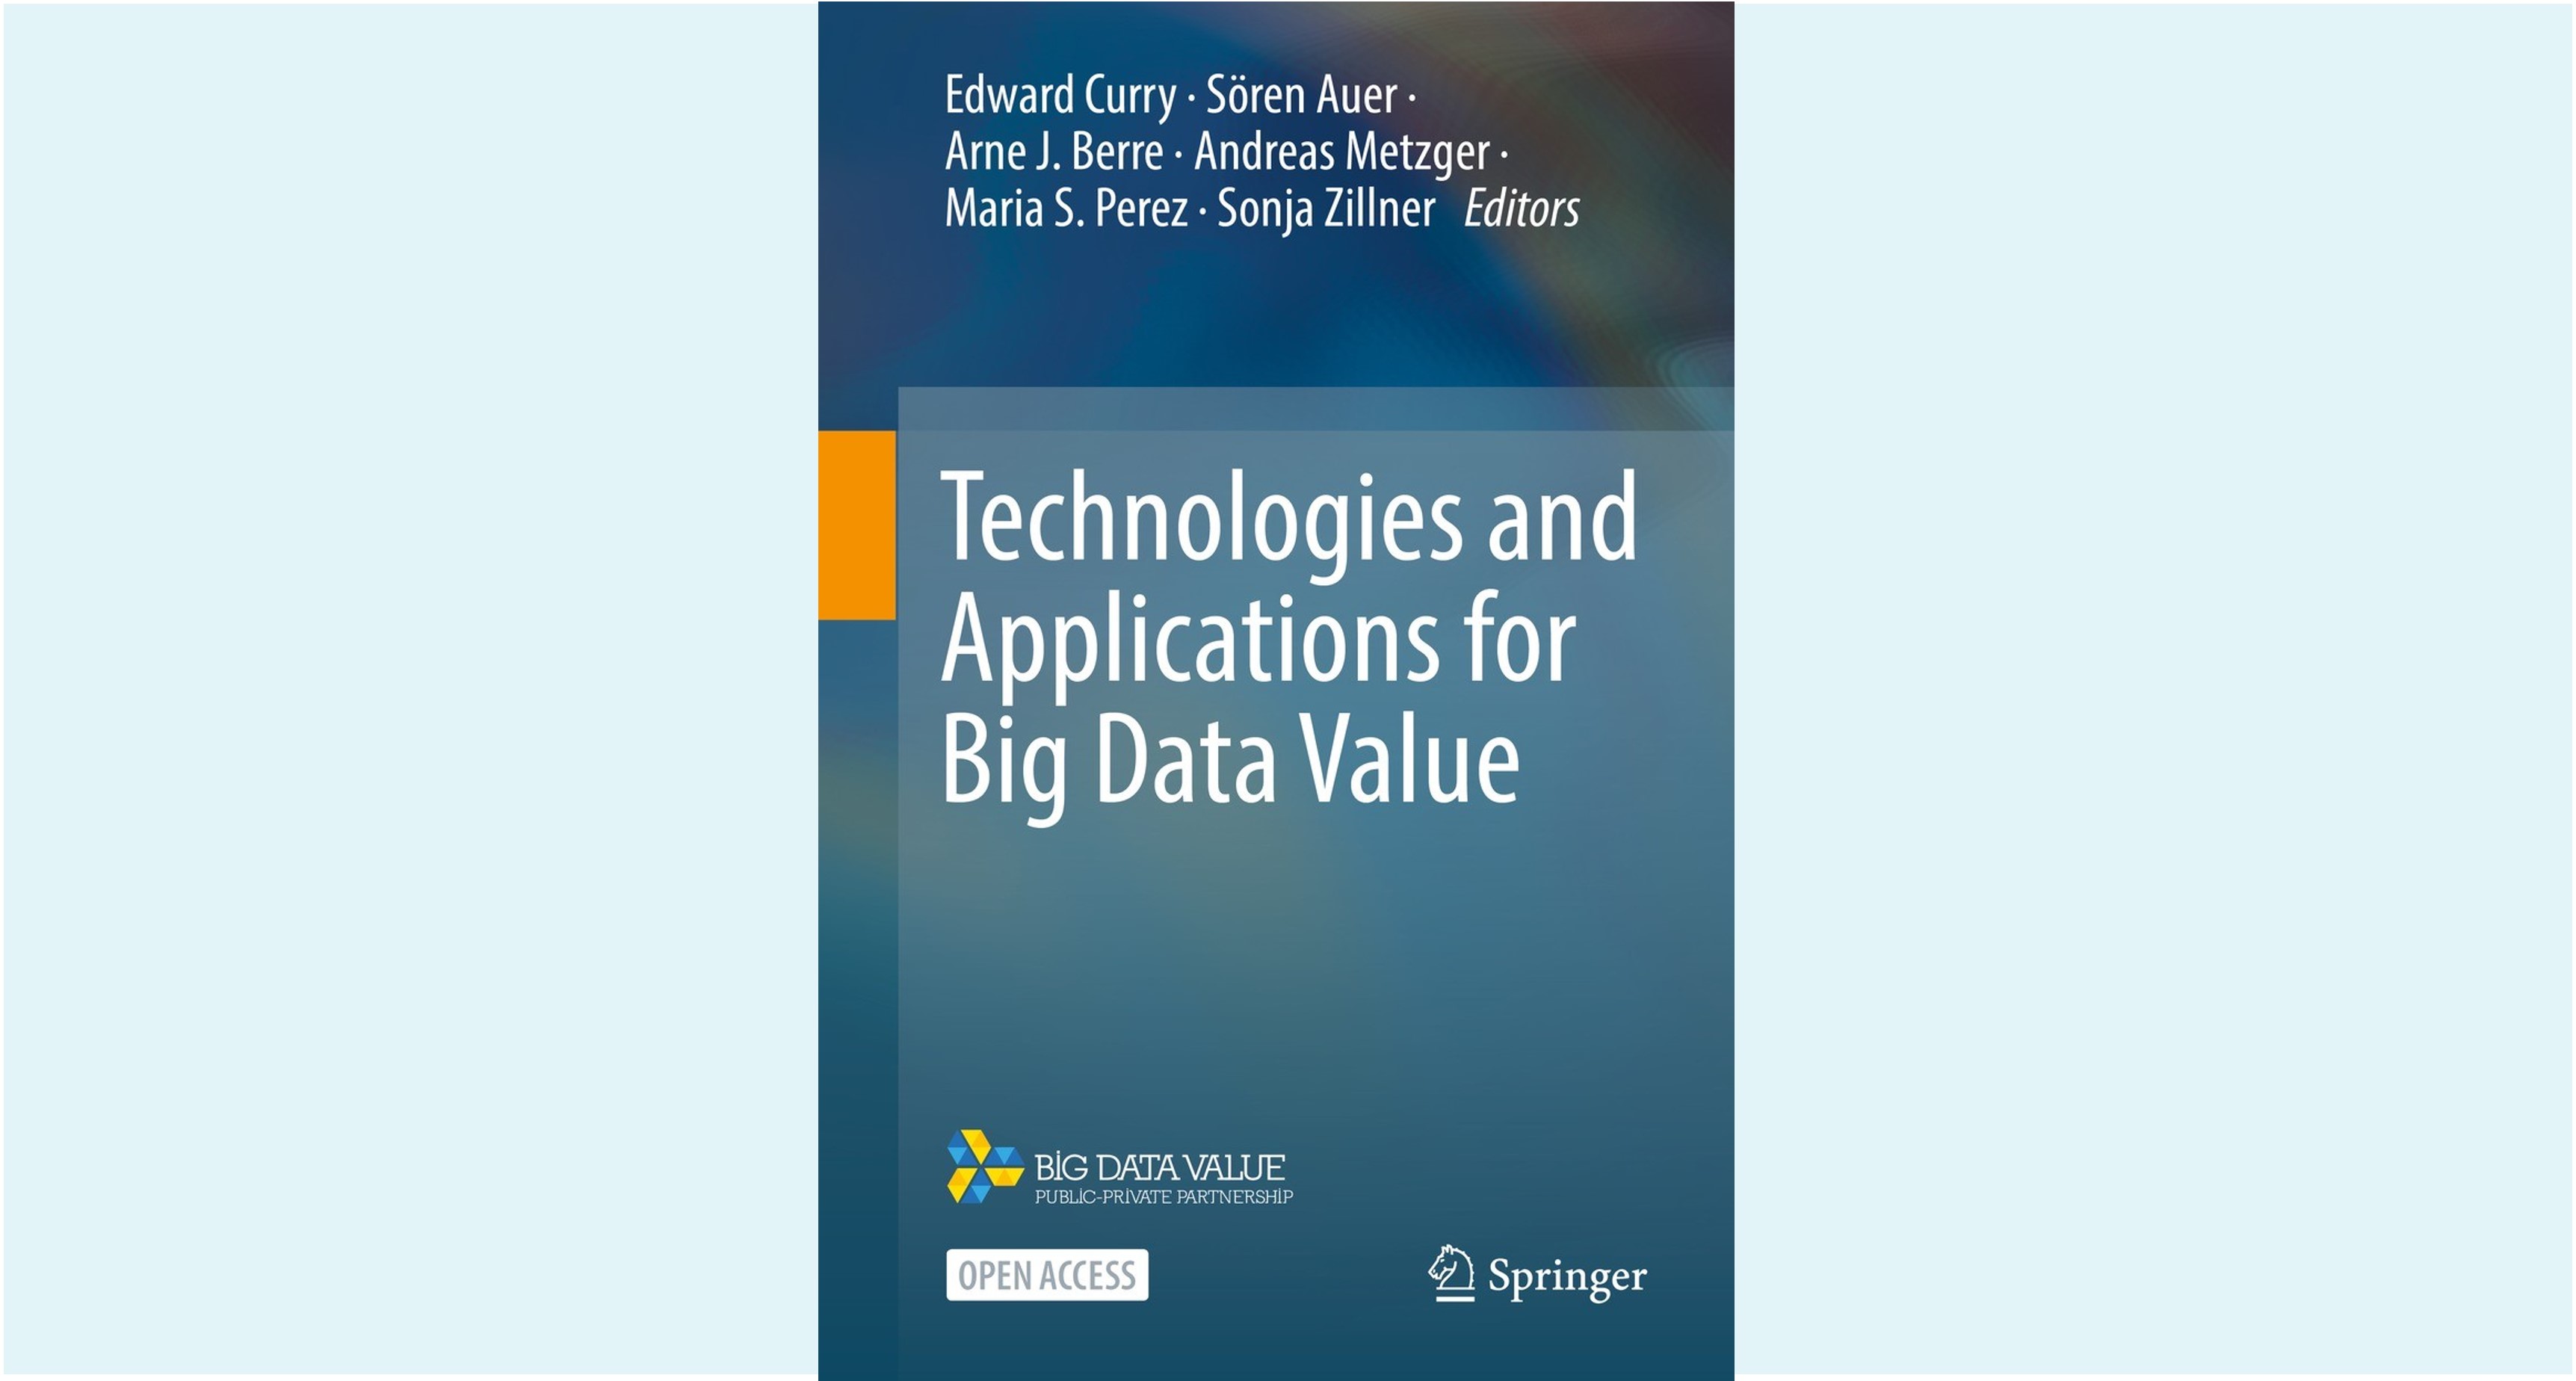 Technologies and Applications for Big Data Value, Springer